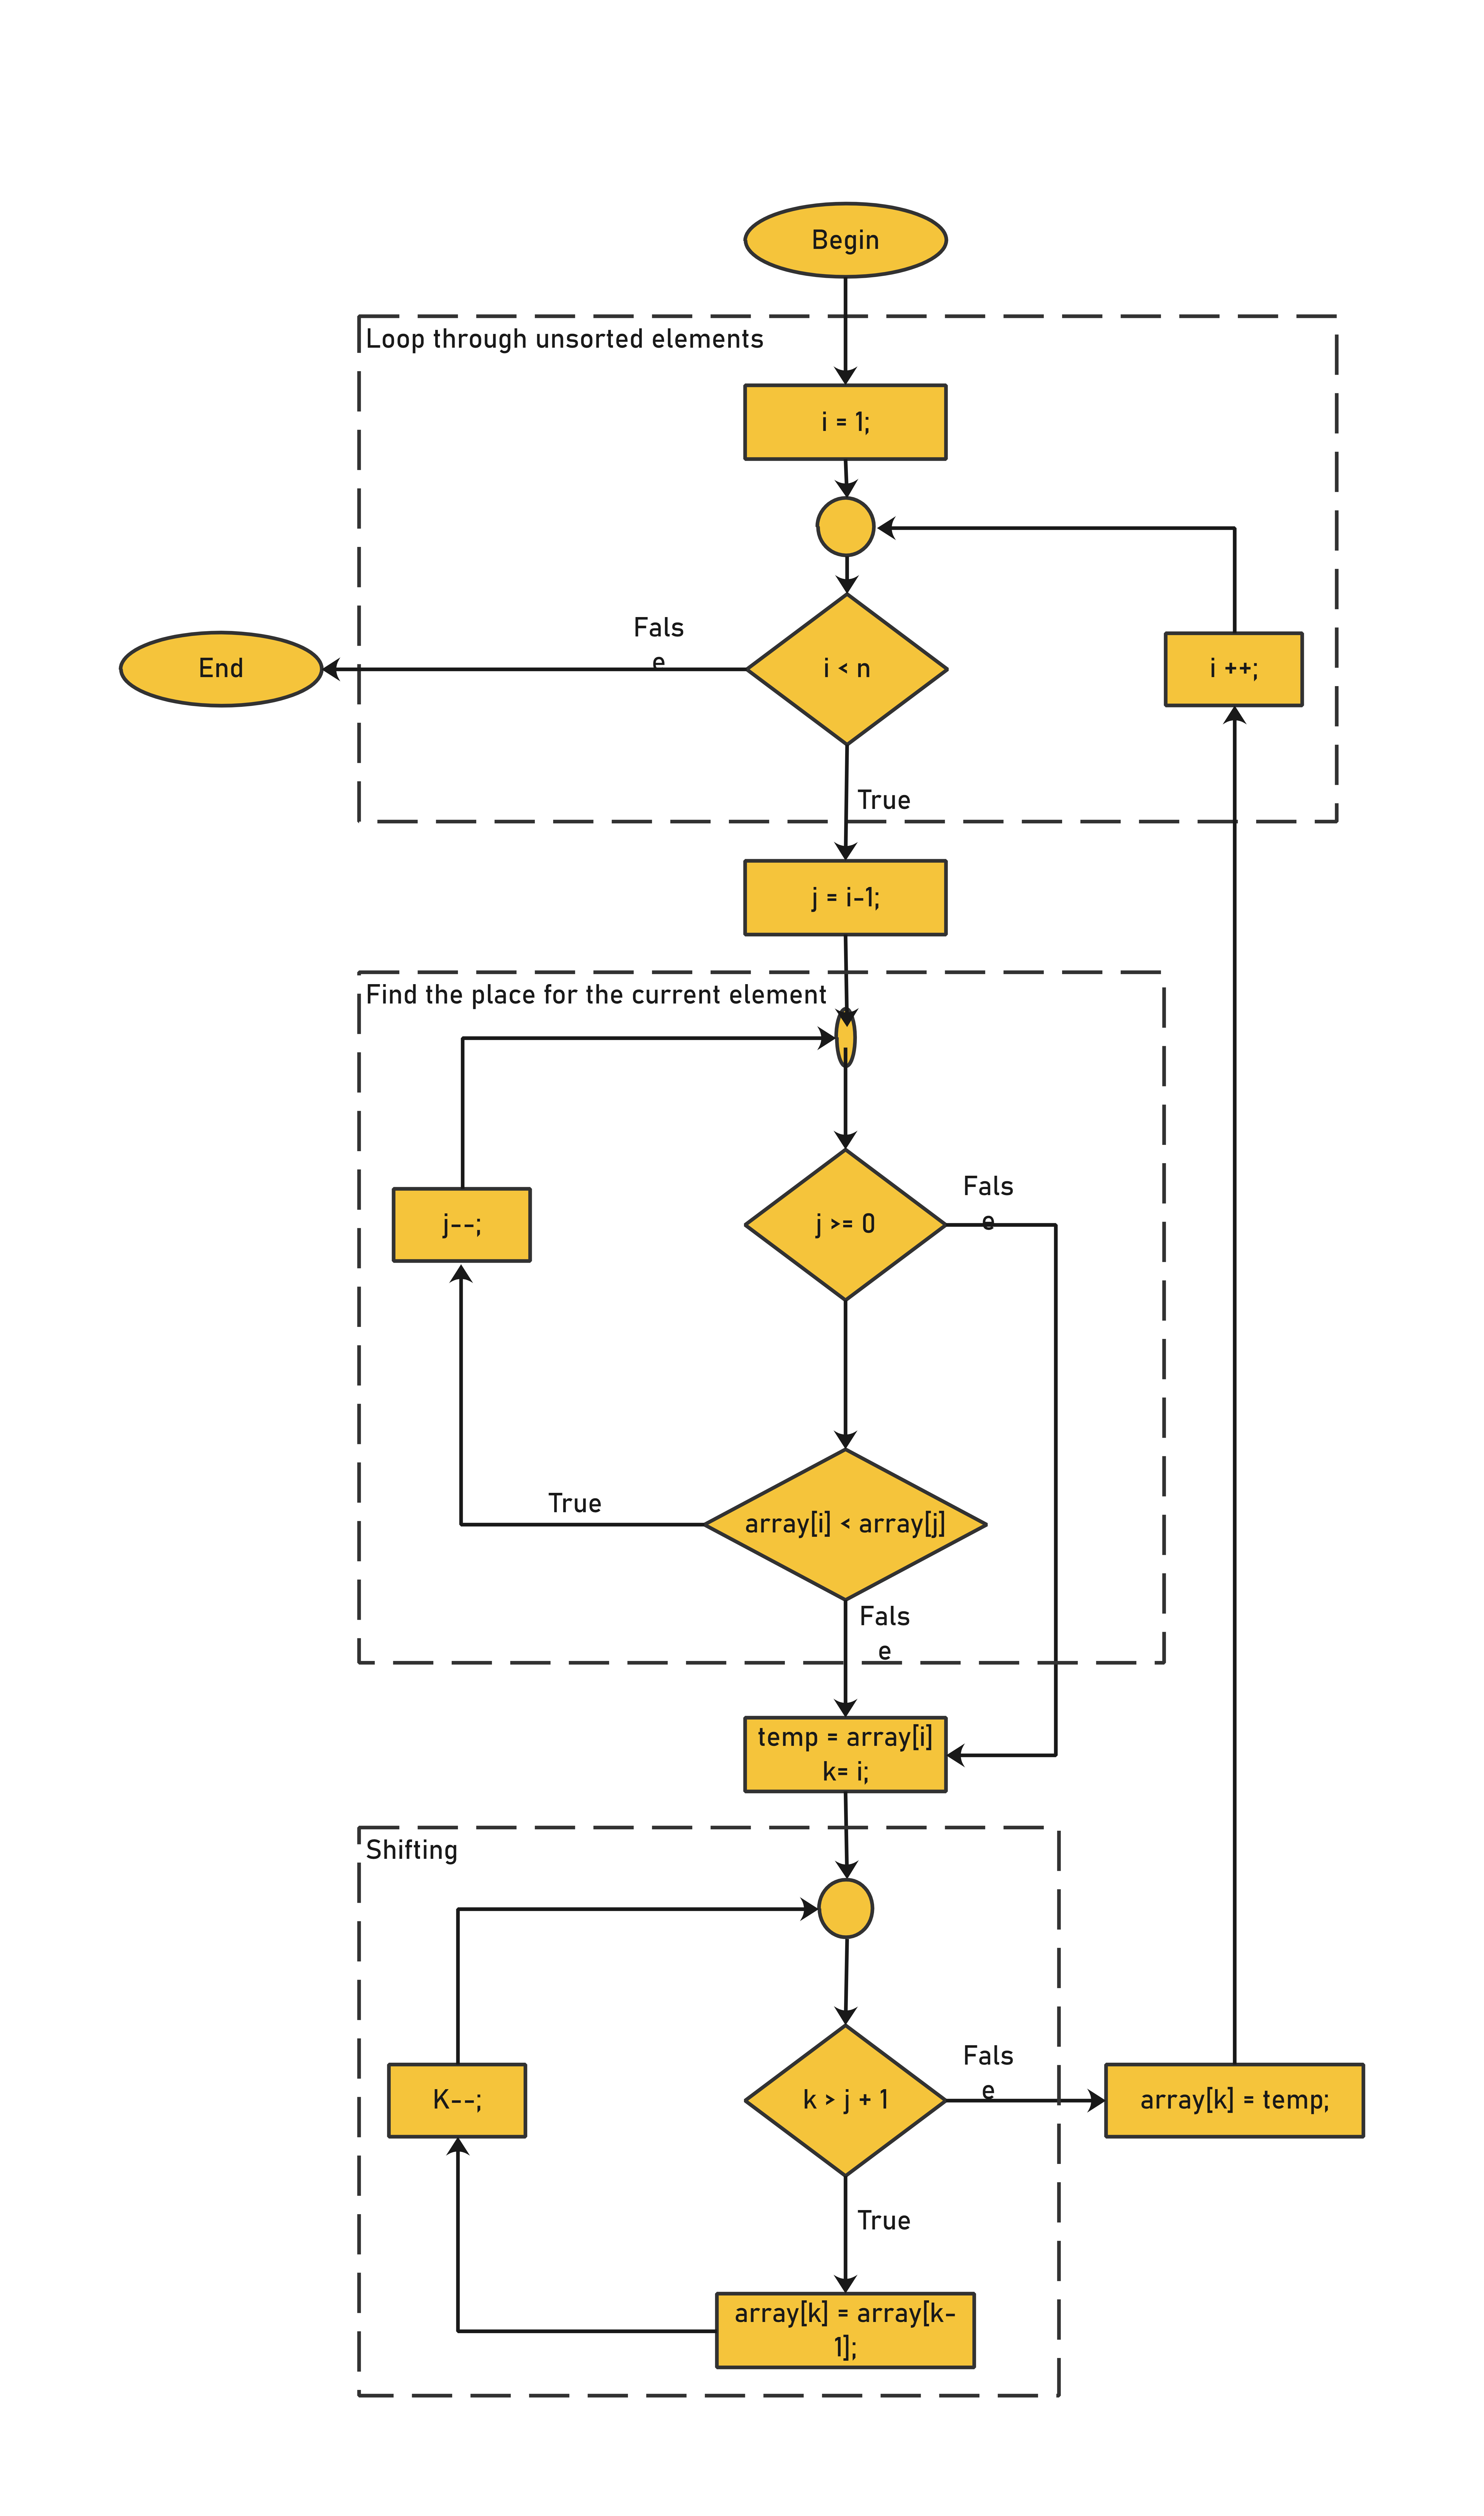 Flowchart Connectors Uses Types Benefits And Approaches